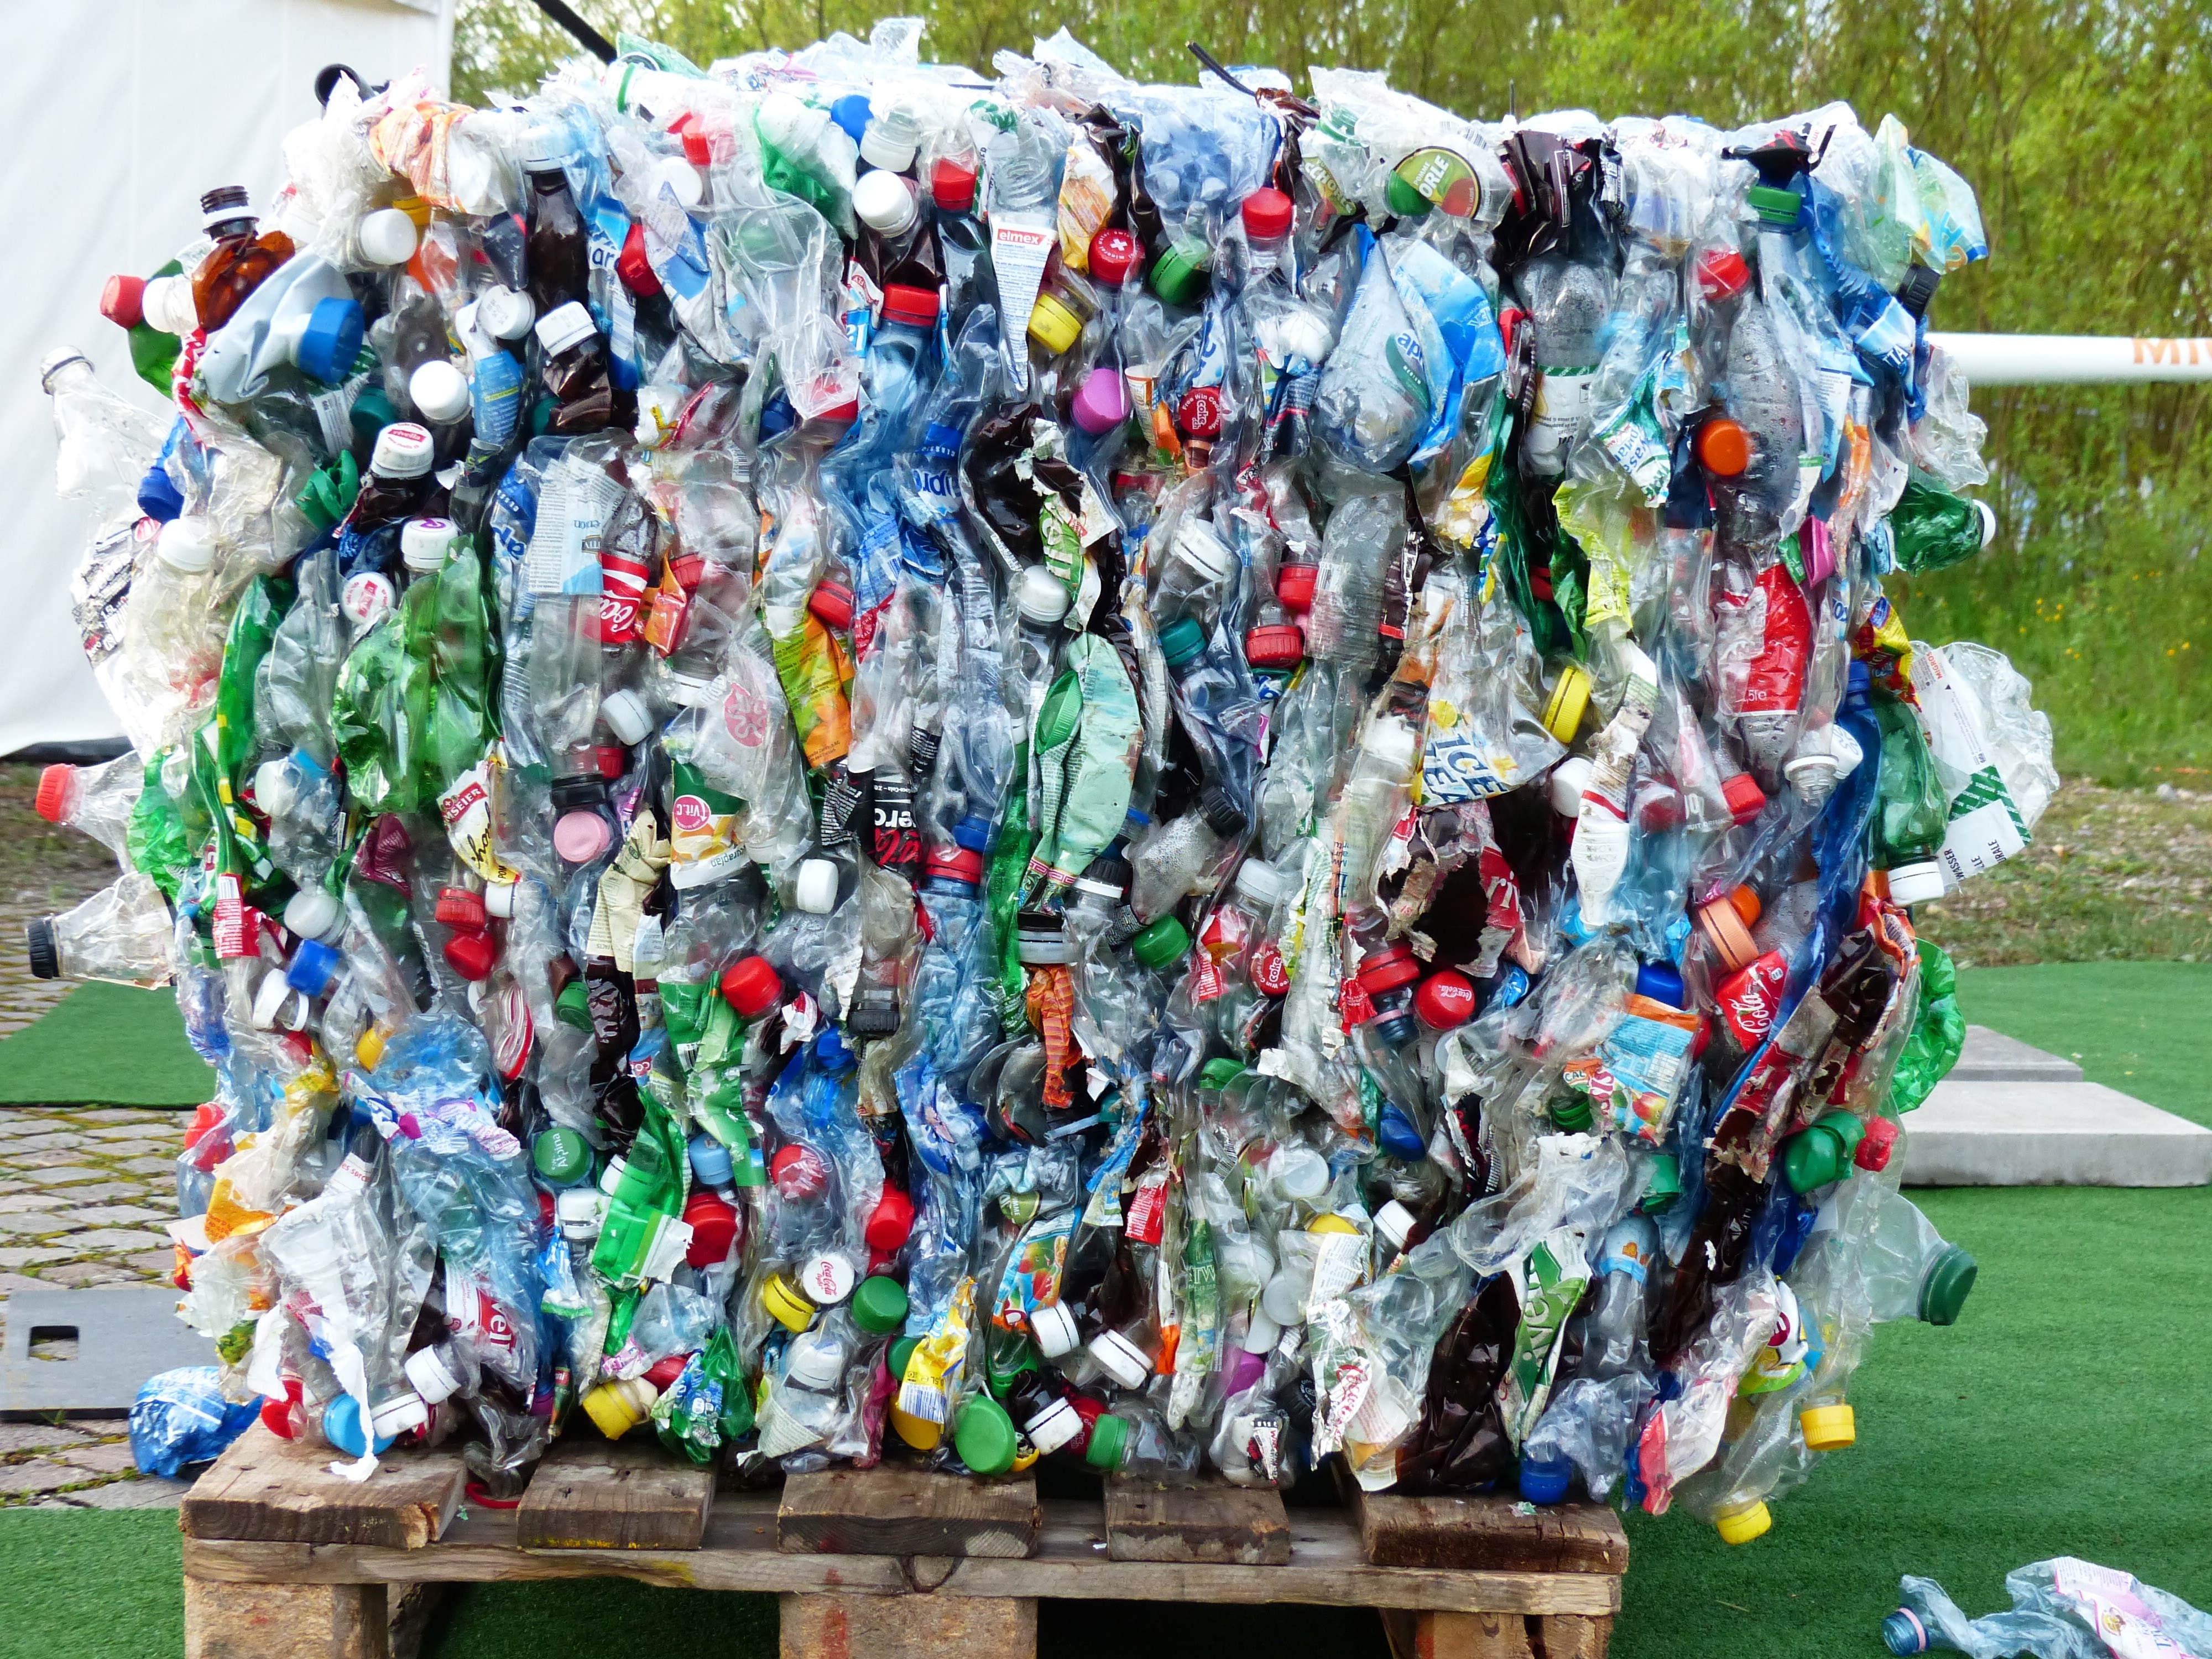 Plastic Bottles, Recycling, Bottles, large group of objects, day